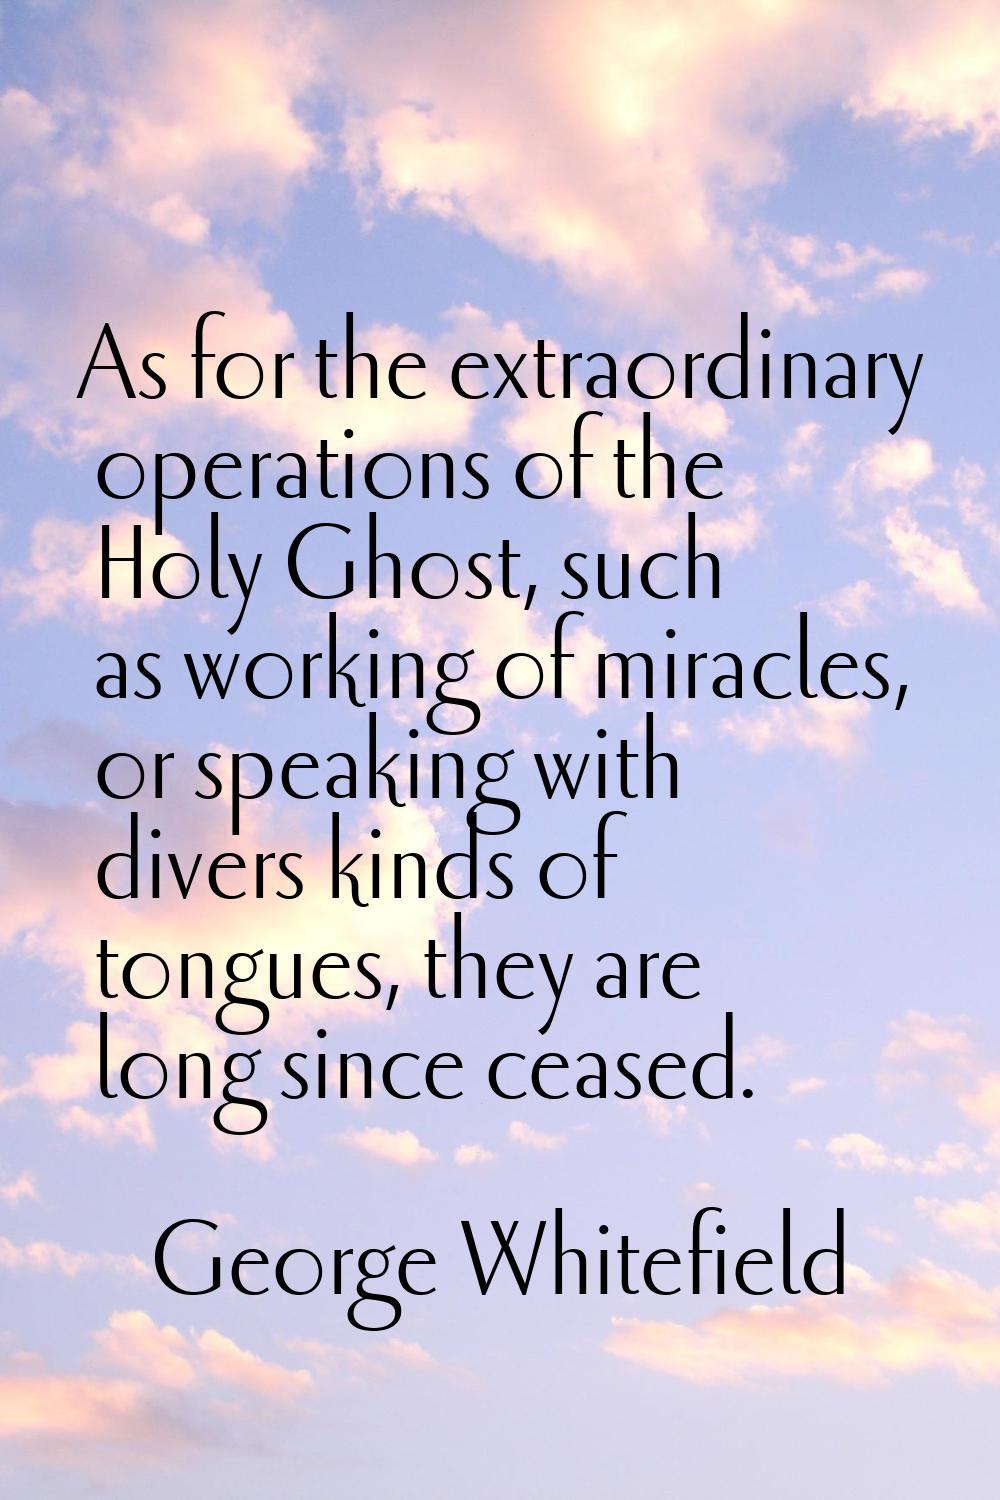 As for the extraordinary operations of the Holy Ghost, such as working of miracles, or speaking wit